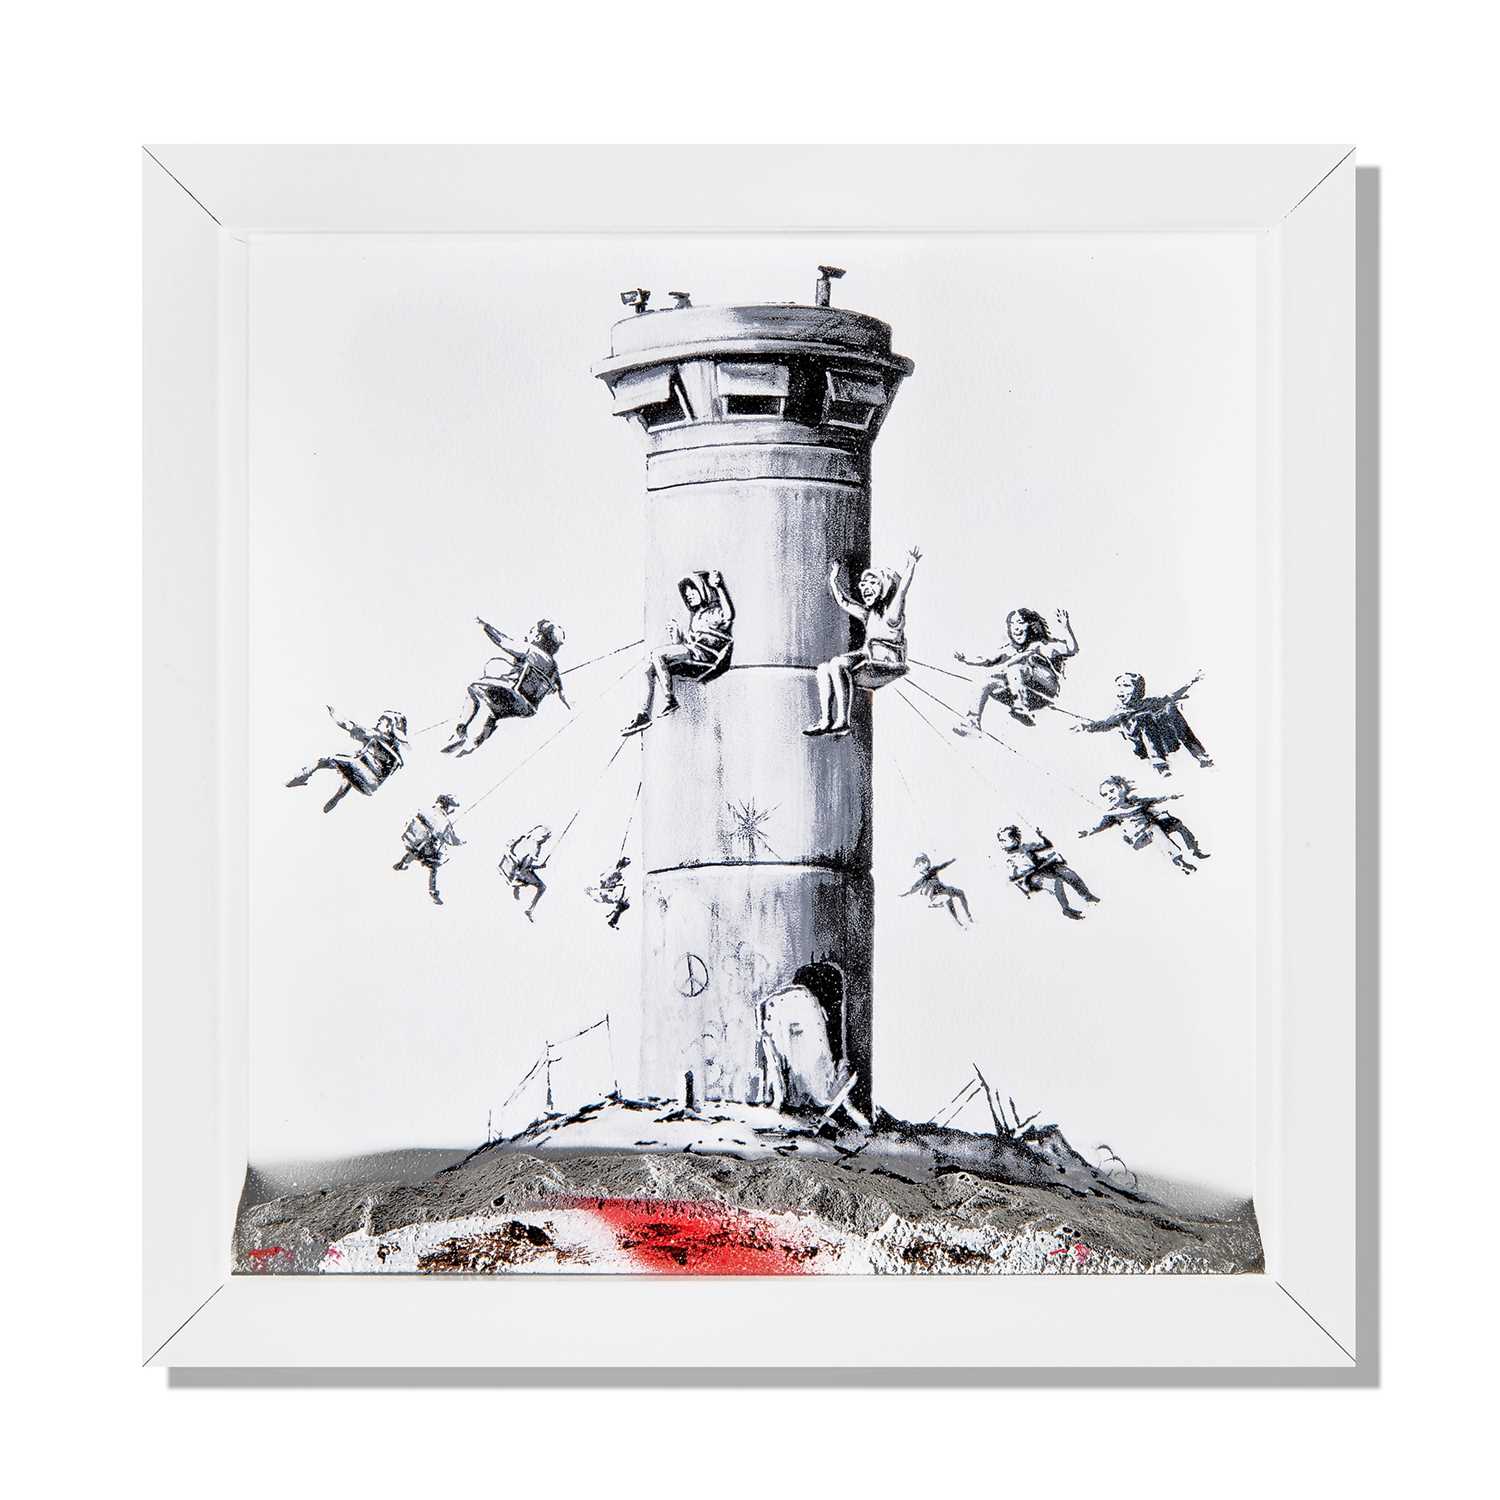 THE WALLED OFF HOTEL BOX SET Banksy